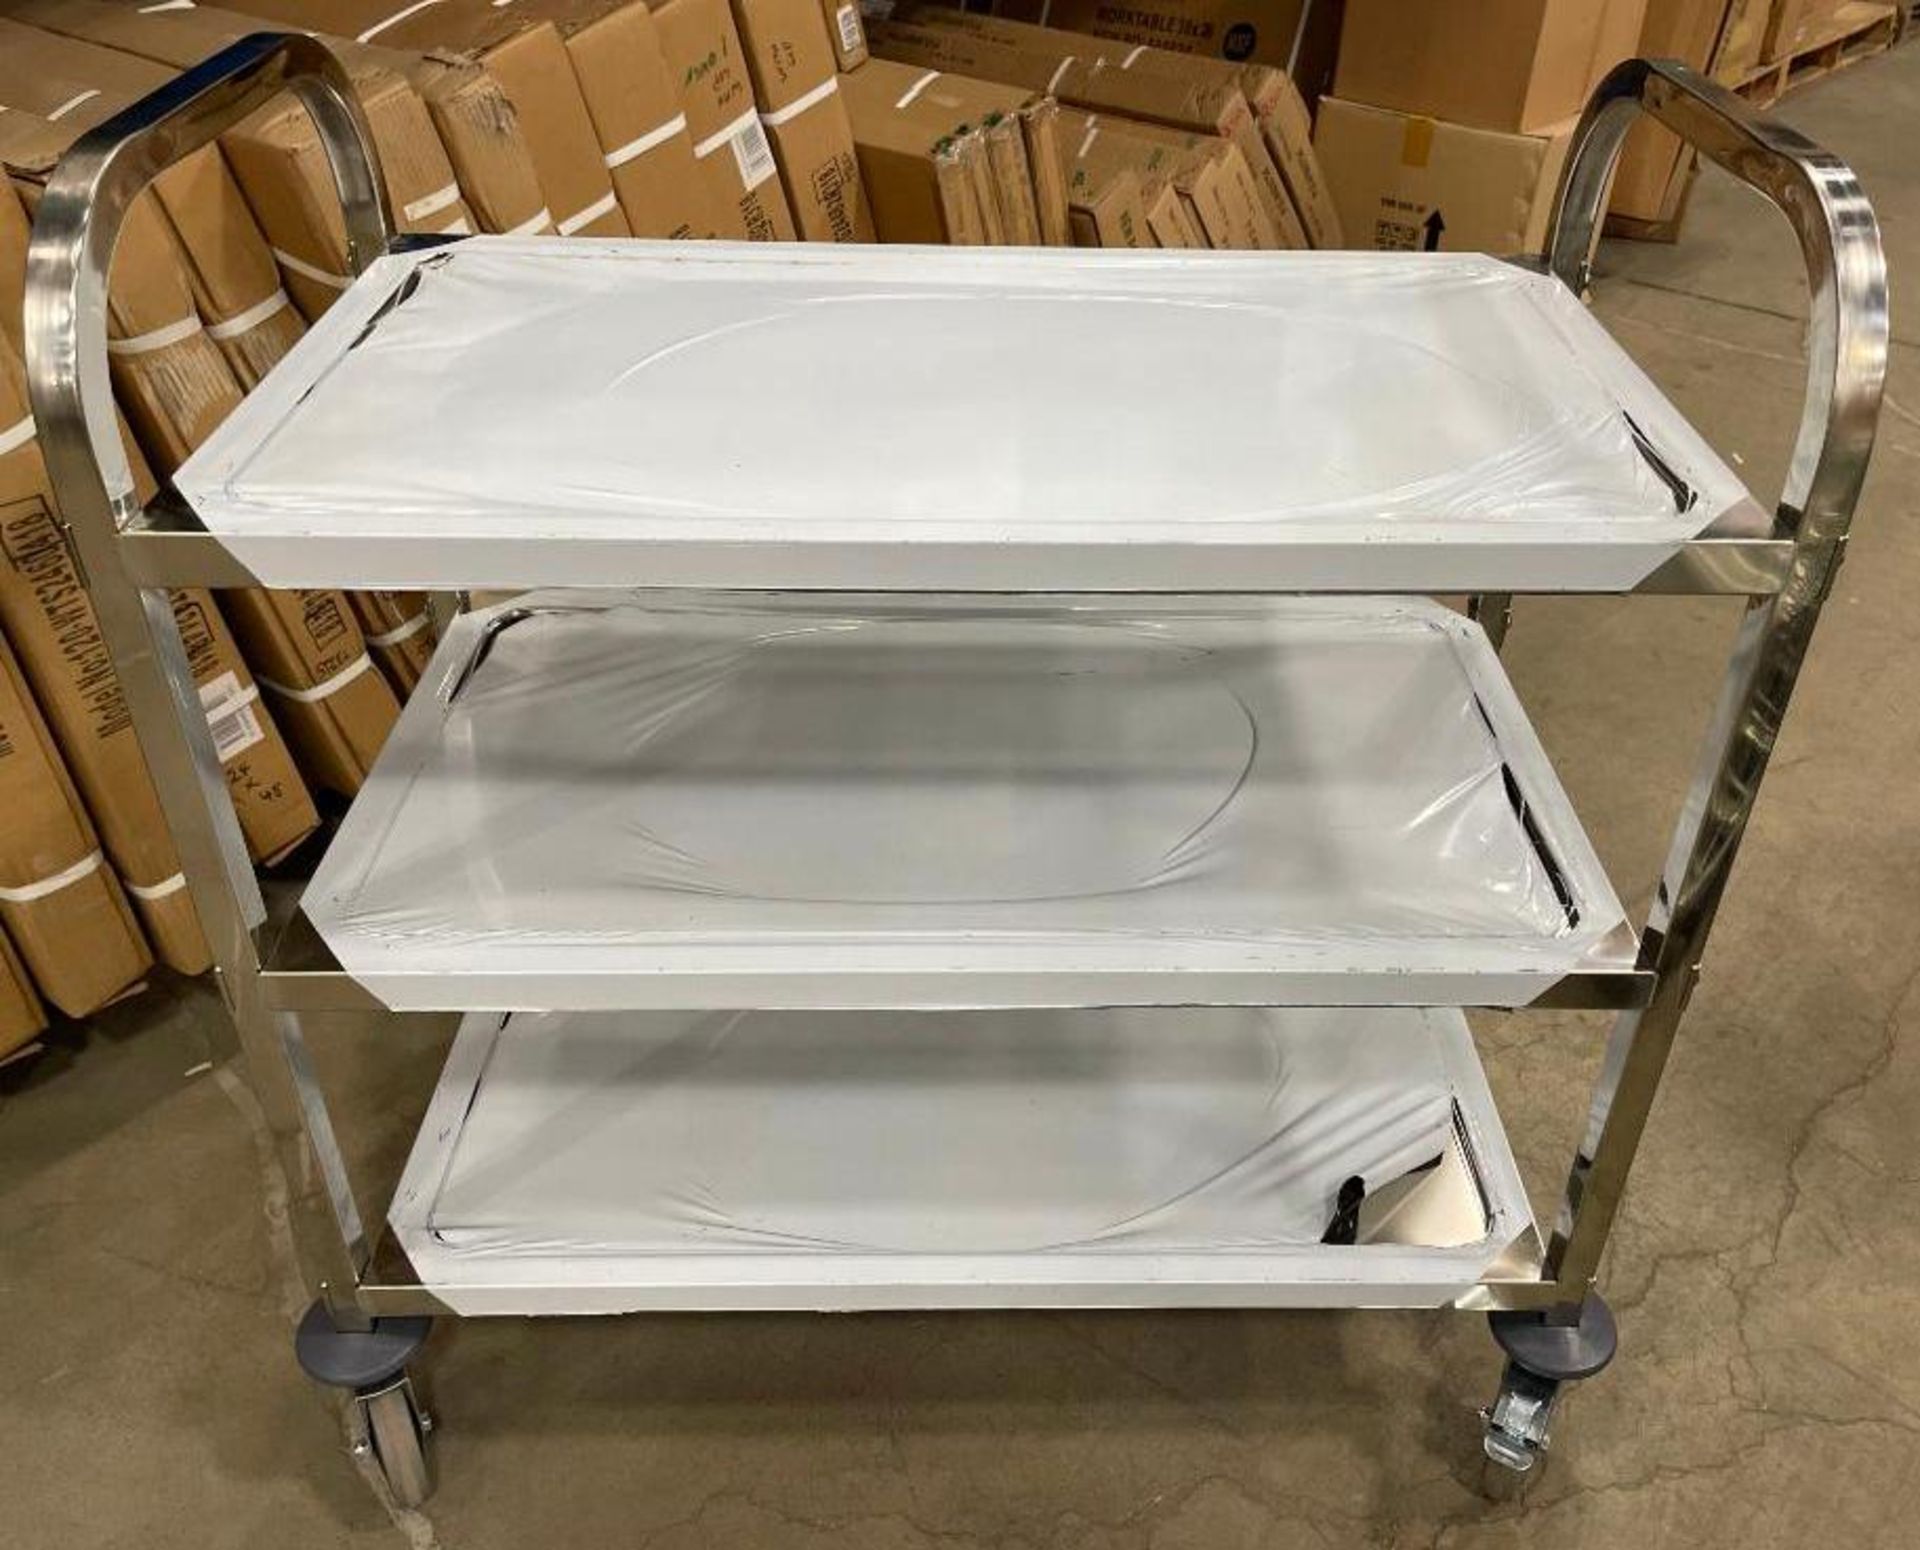 31" X 17" STAINLESS STEEL 3 TIER BUSSING CART - NEW - OMCAN 24419 - Image 2 of 4